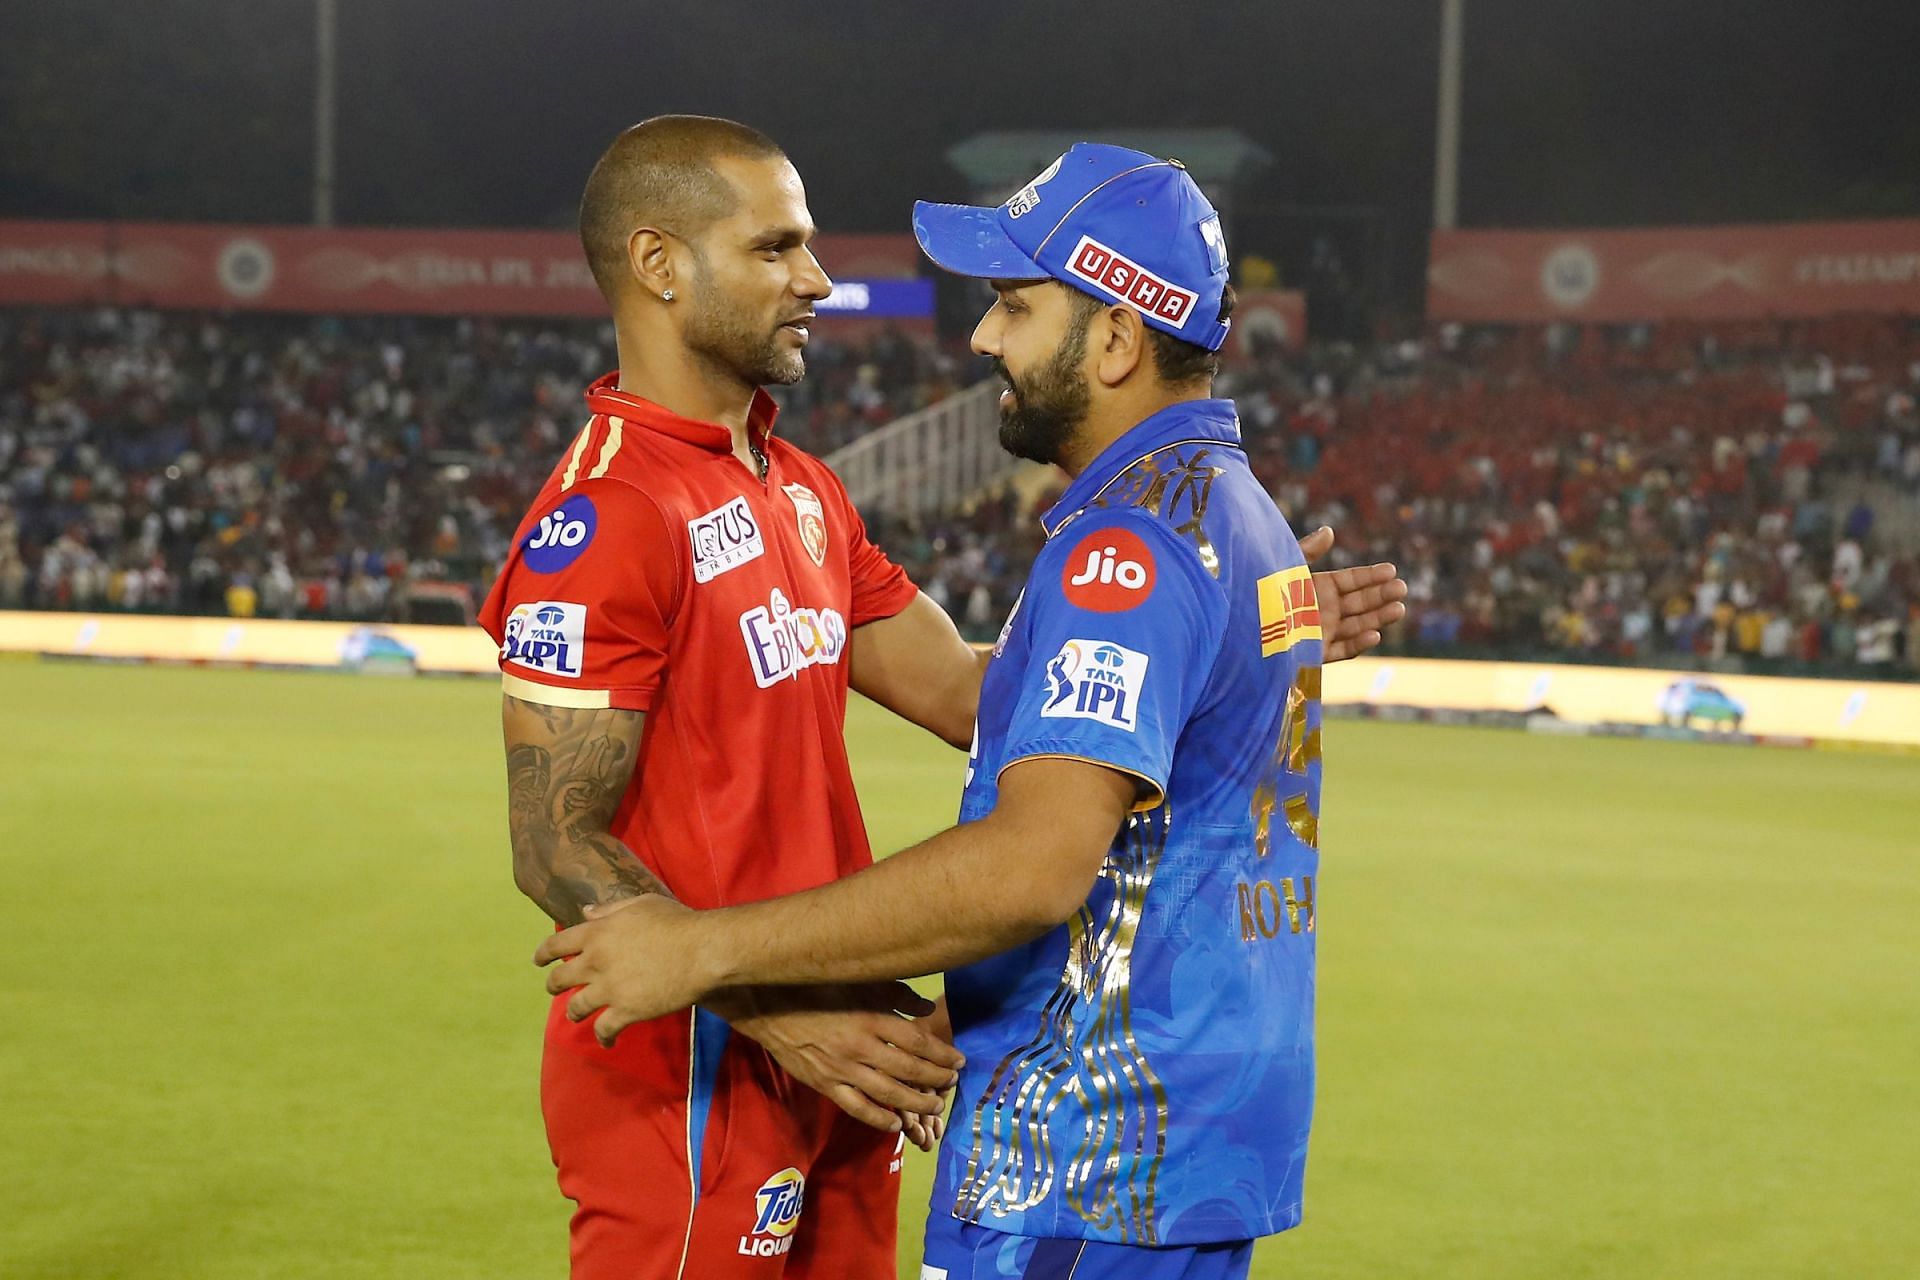 Shikhar Dhawan and Rohit Sharma embrace after the game. (Credits: Twitter)